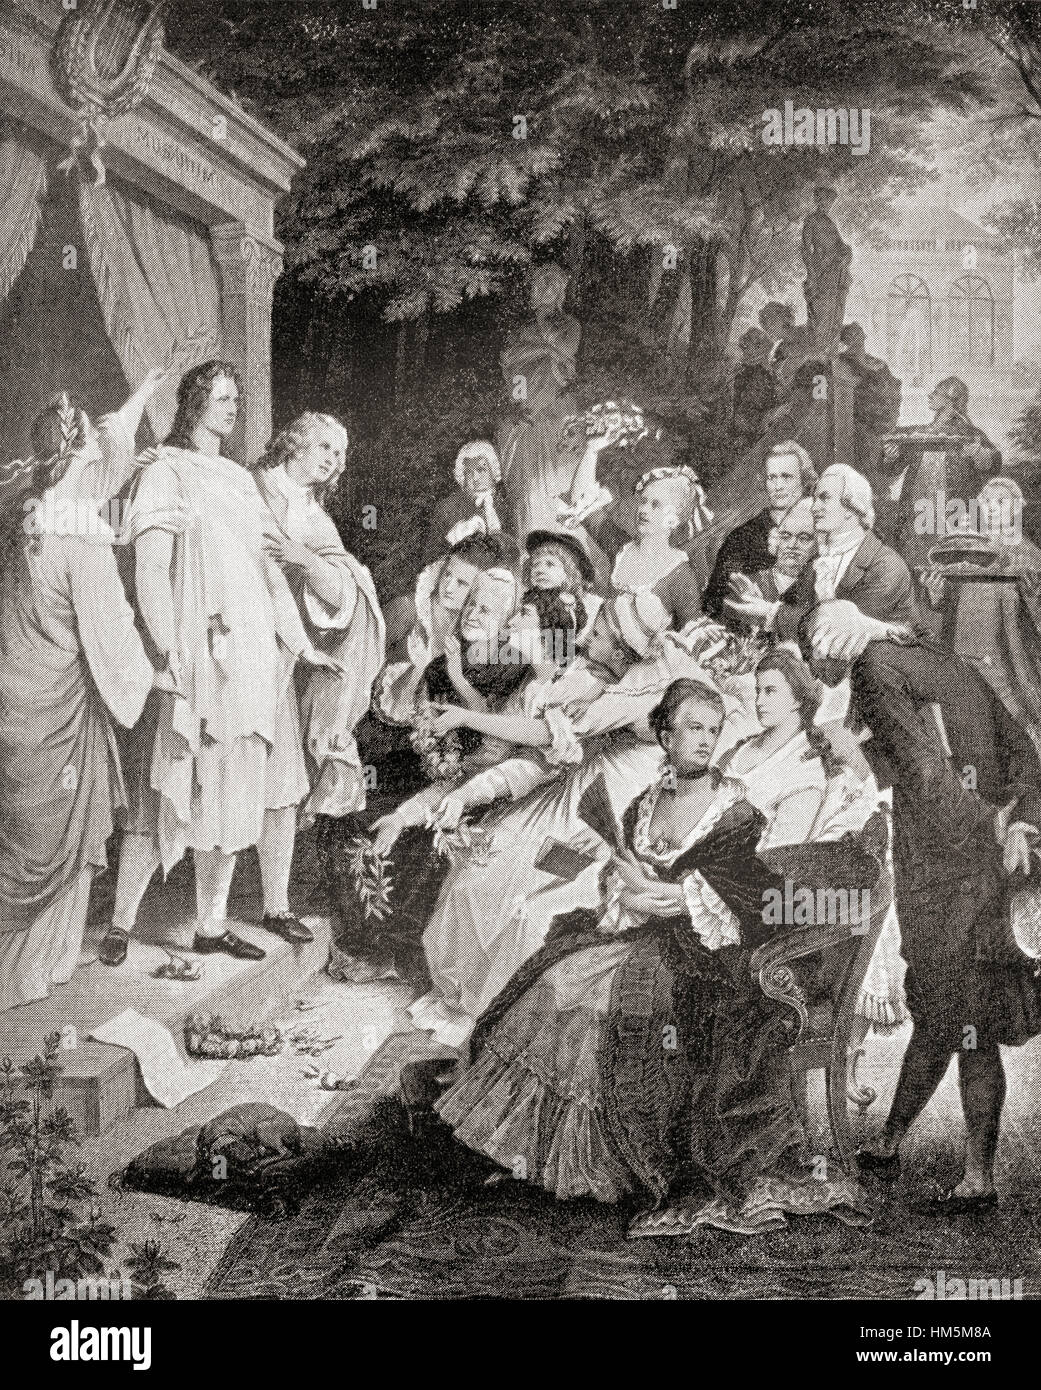 Engraving titled 'Goethe in Weimar' by German painter Wilhelm von Kaulbach (1805-1874) depicting a  performance of Iphigenia in Tauris featuring Goethe as Orestes, Karl August as Pylades, and Corona Schröter as Iphigenia. Stock Photo